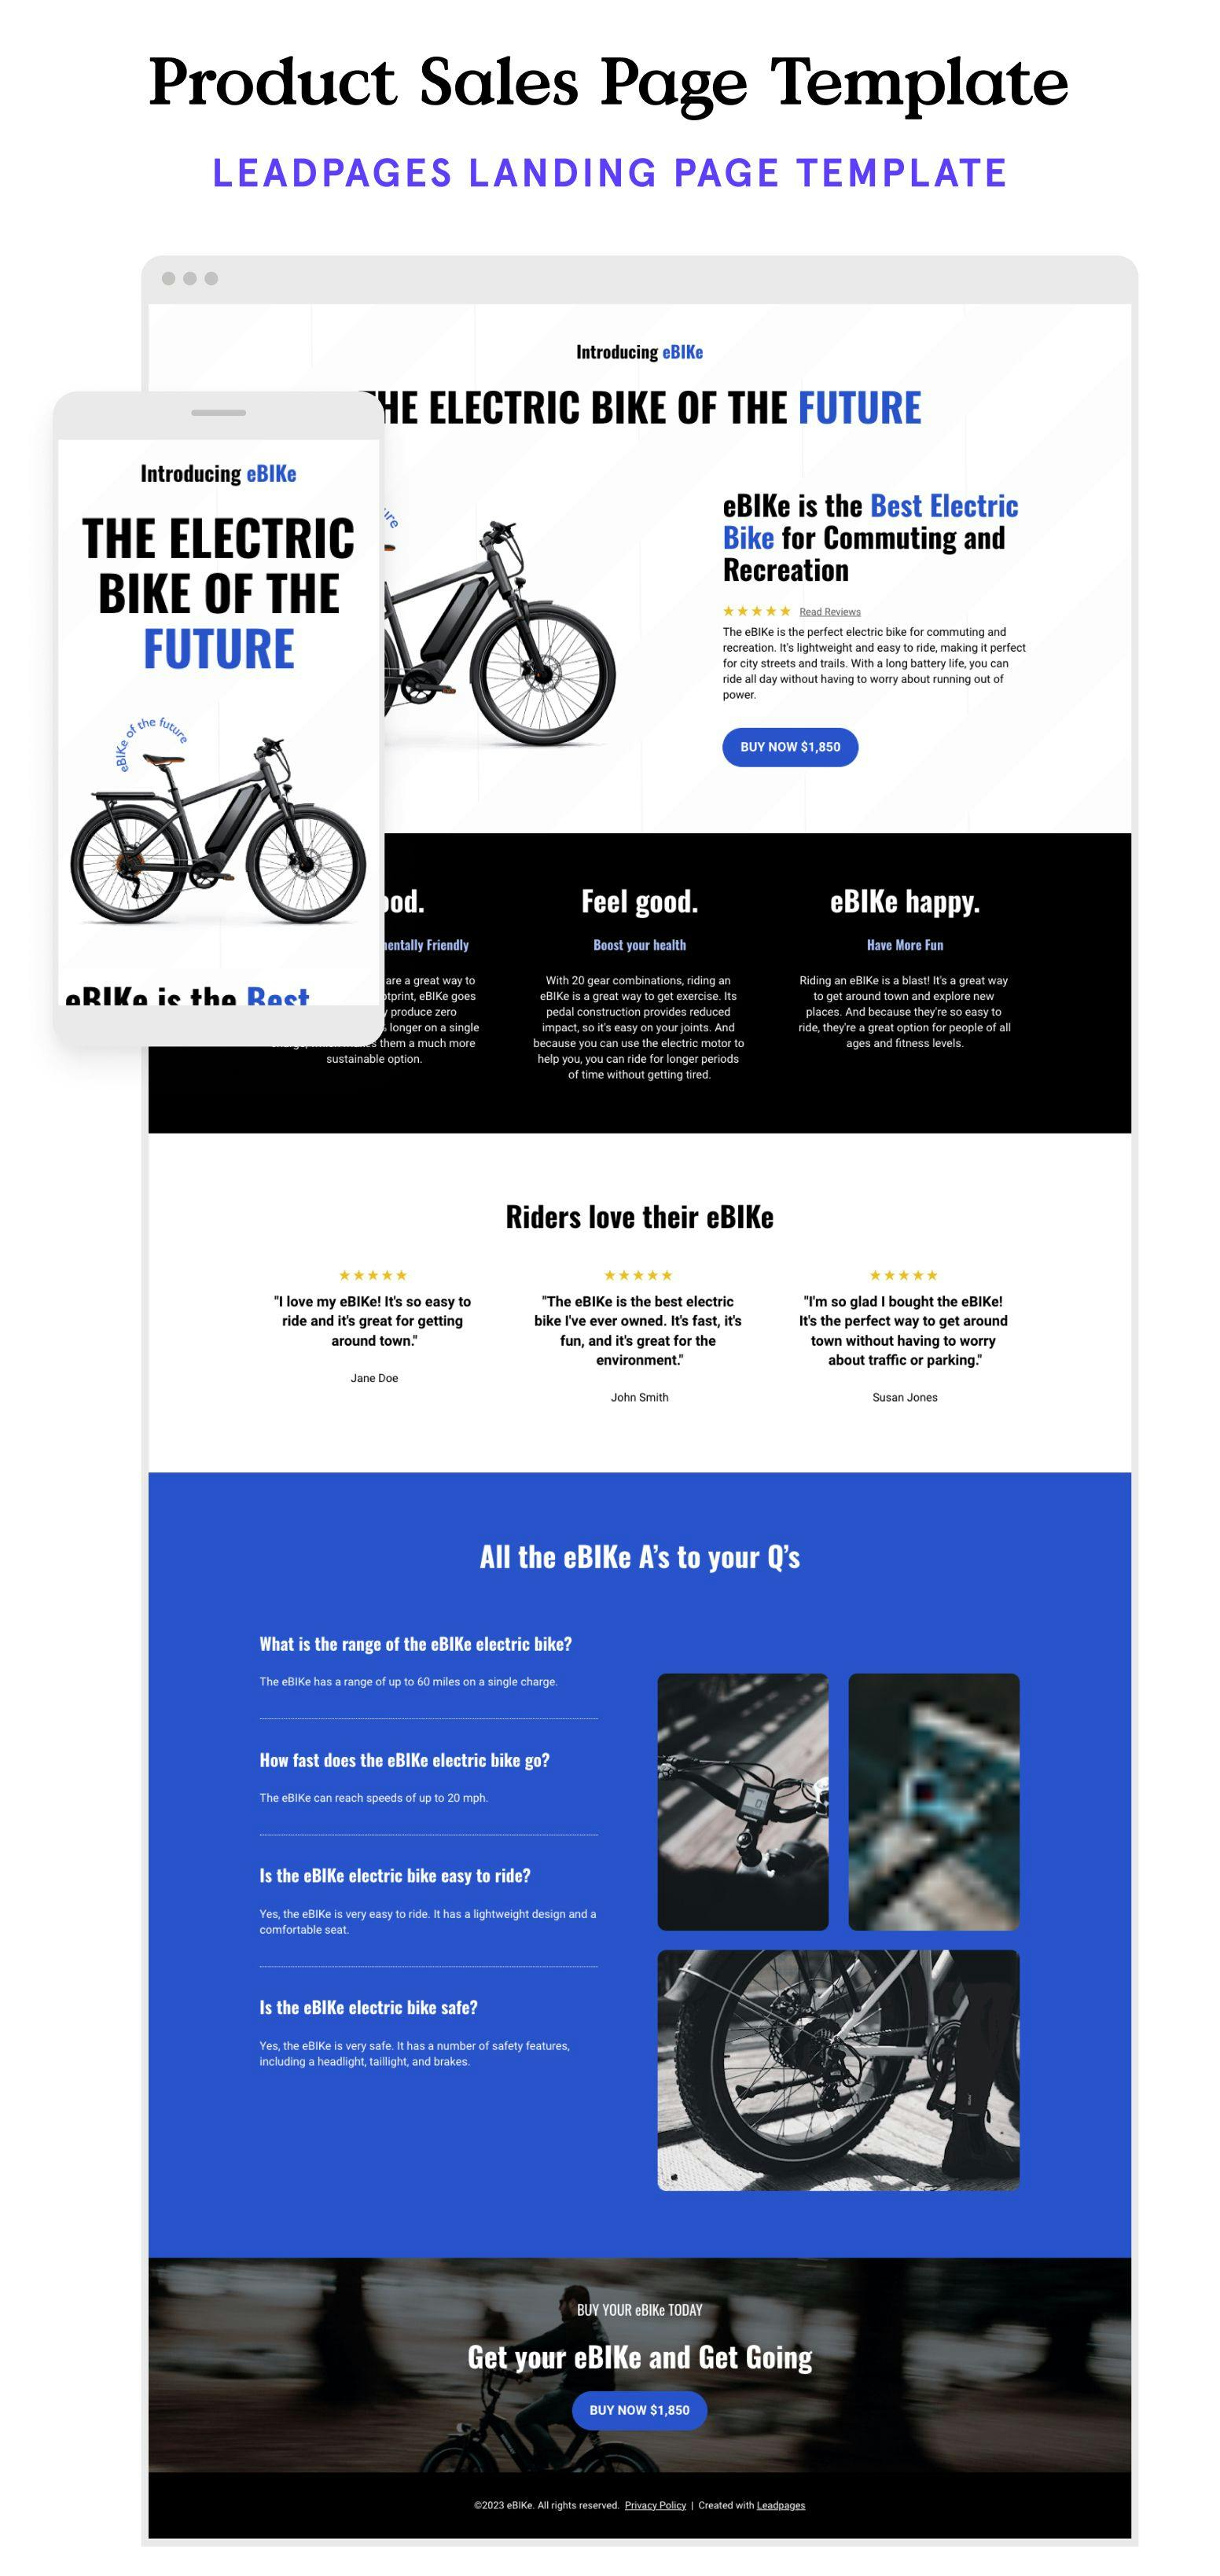 Physical product landing page template